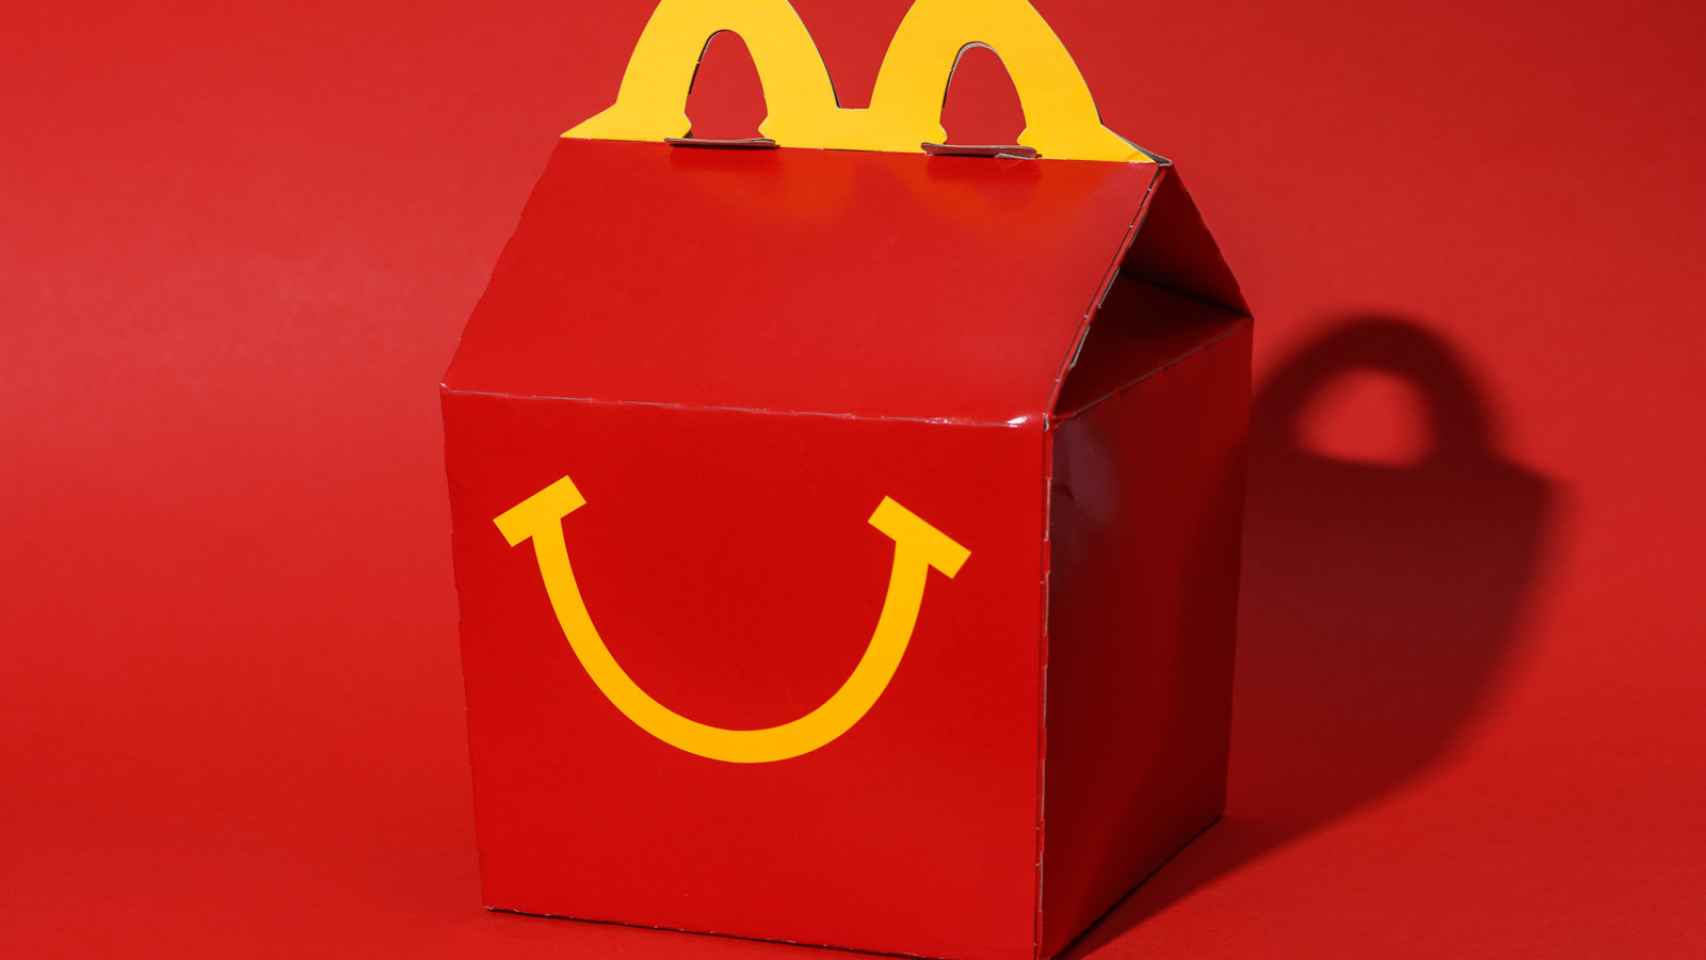 'Happy meal' vegetariano